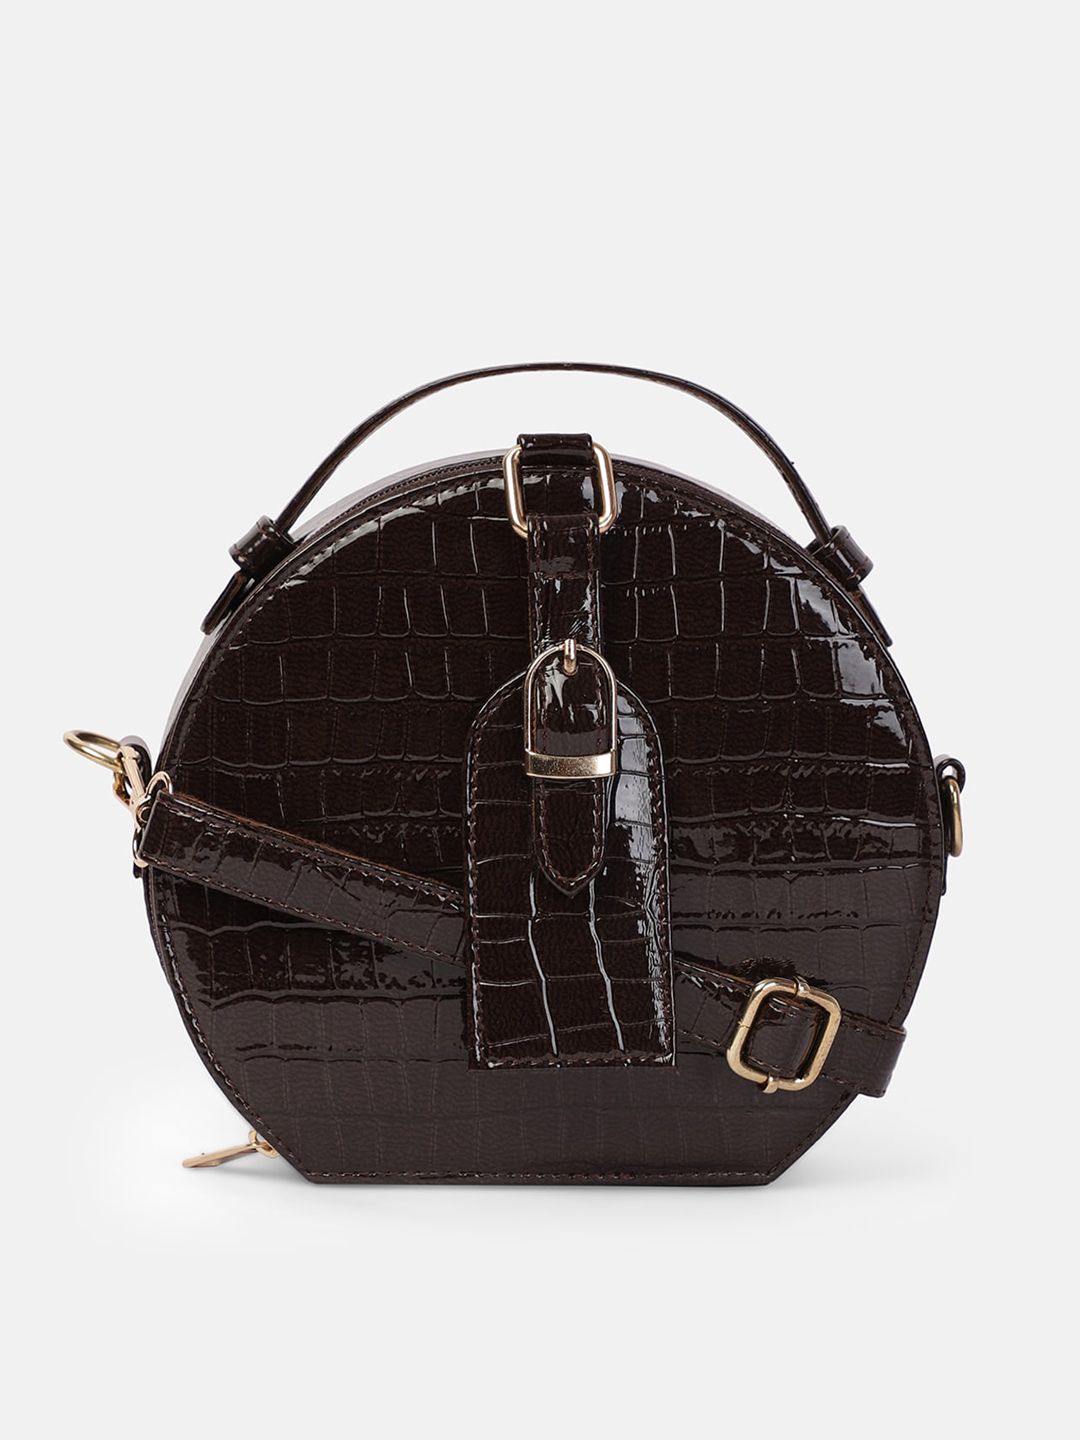 Bagsy Malone Brown Textured PU Structured Sling Bag Price in India